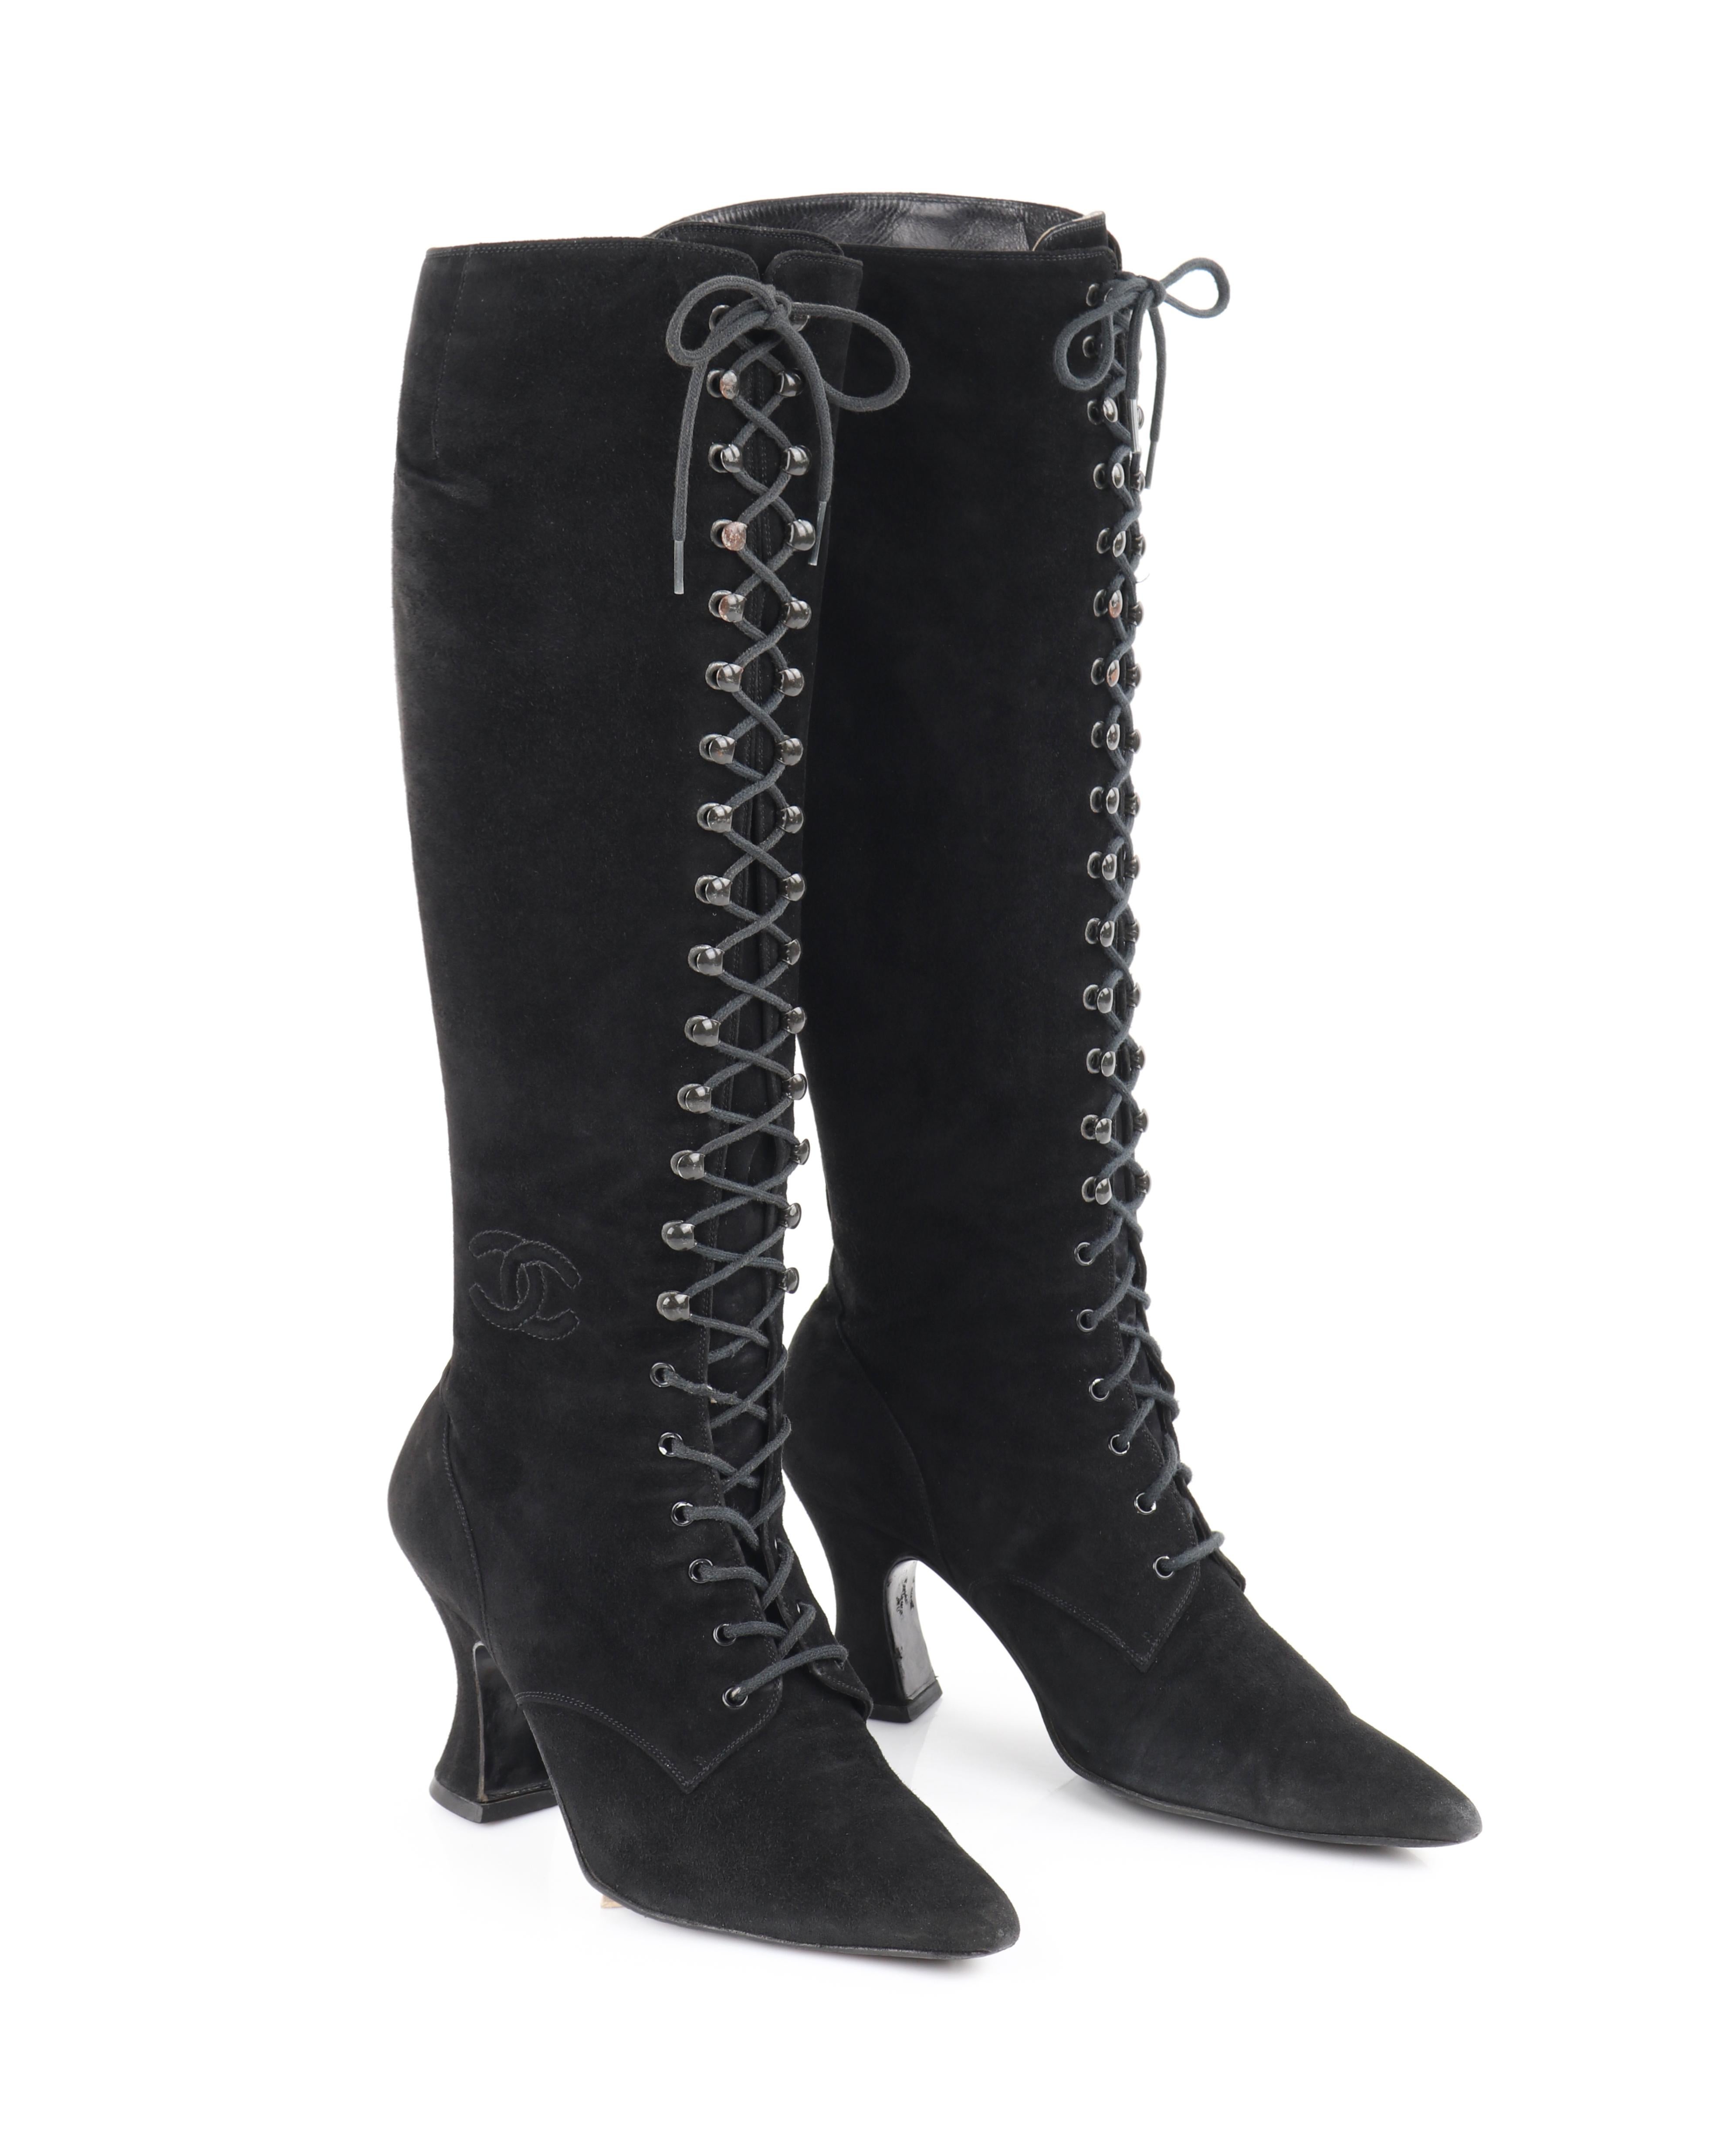 Women's CHANEL Black Suede Leather Victorian Look Knee-High Lace Up Pointed Toe Boots For Sale